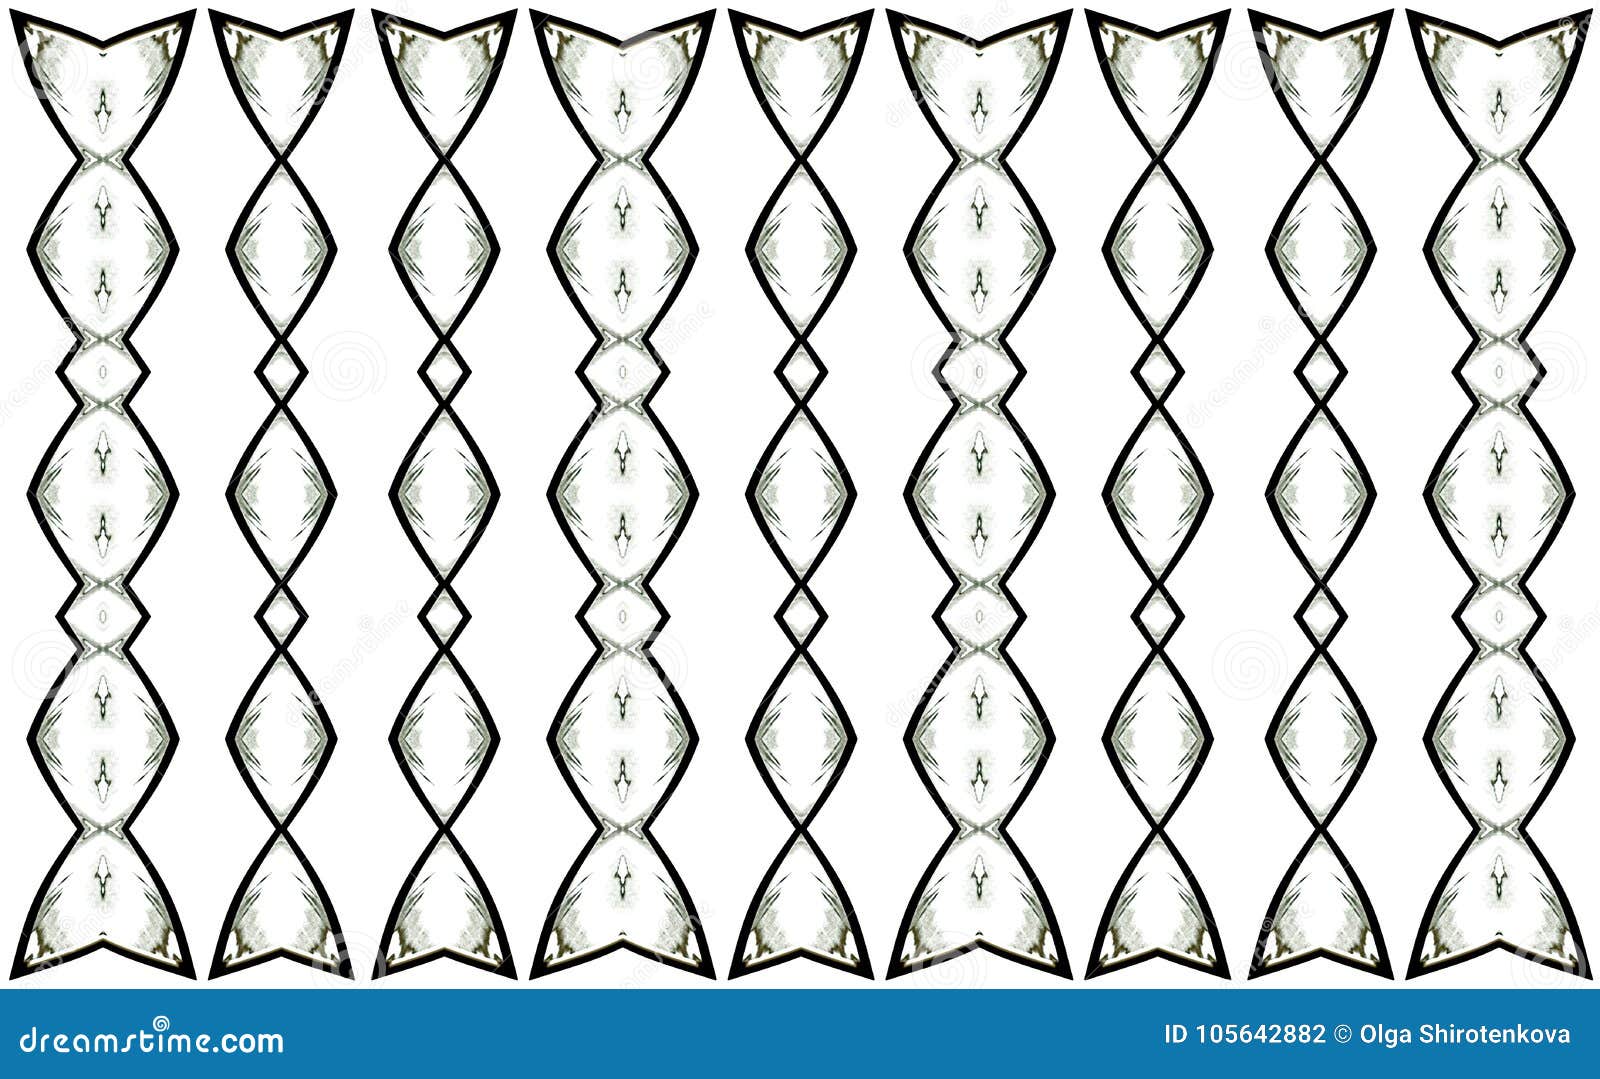 Black geometric pattern in the form of curved, twisted tapes on a white background. Image of tapes for interior design. Abstract illustration. Black-and- white picture. Simbolic art.